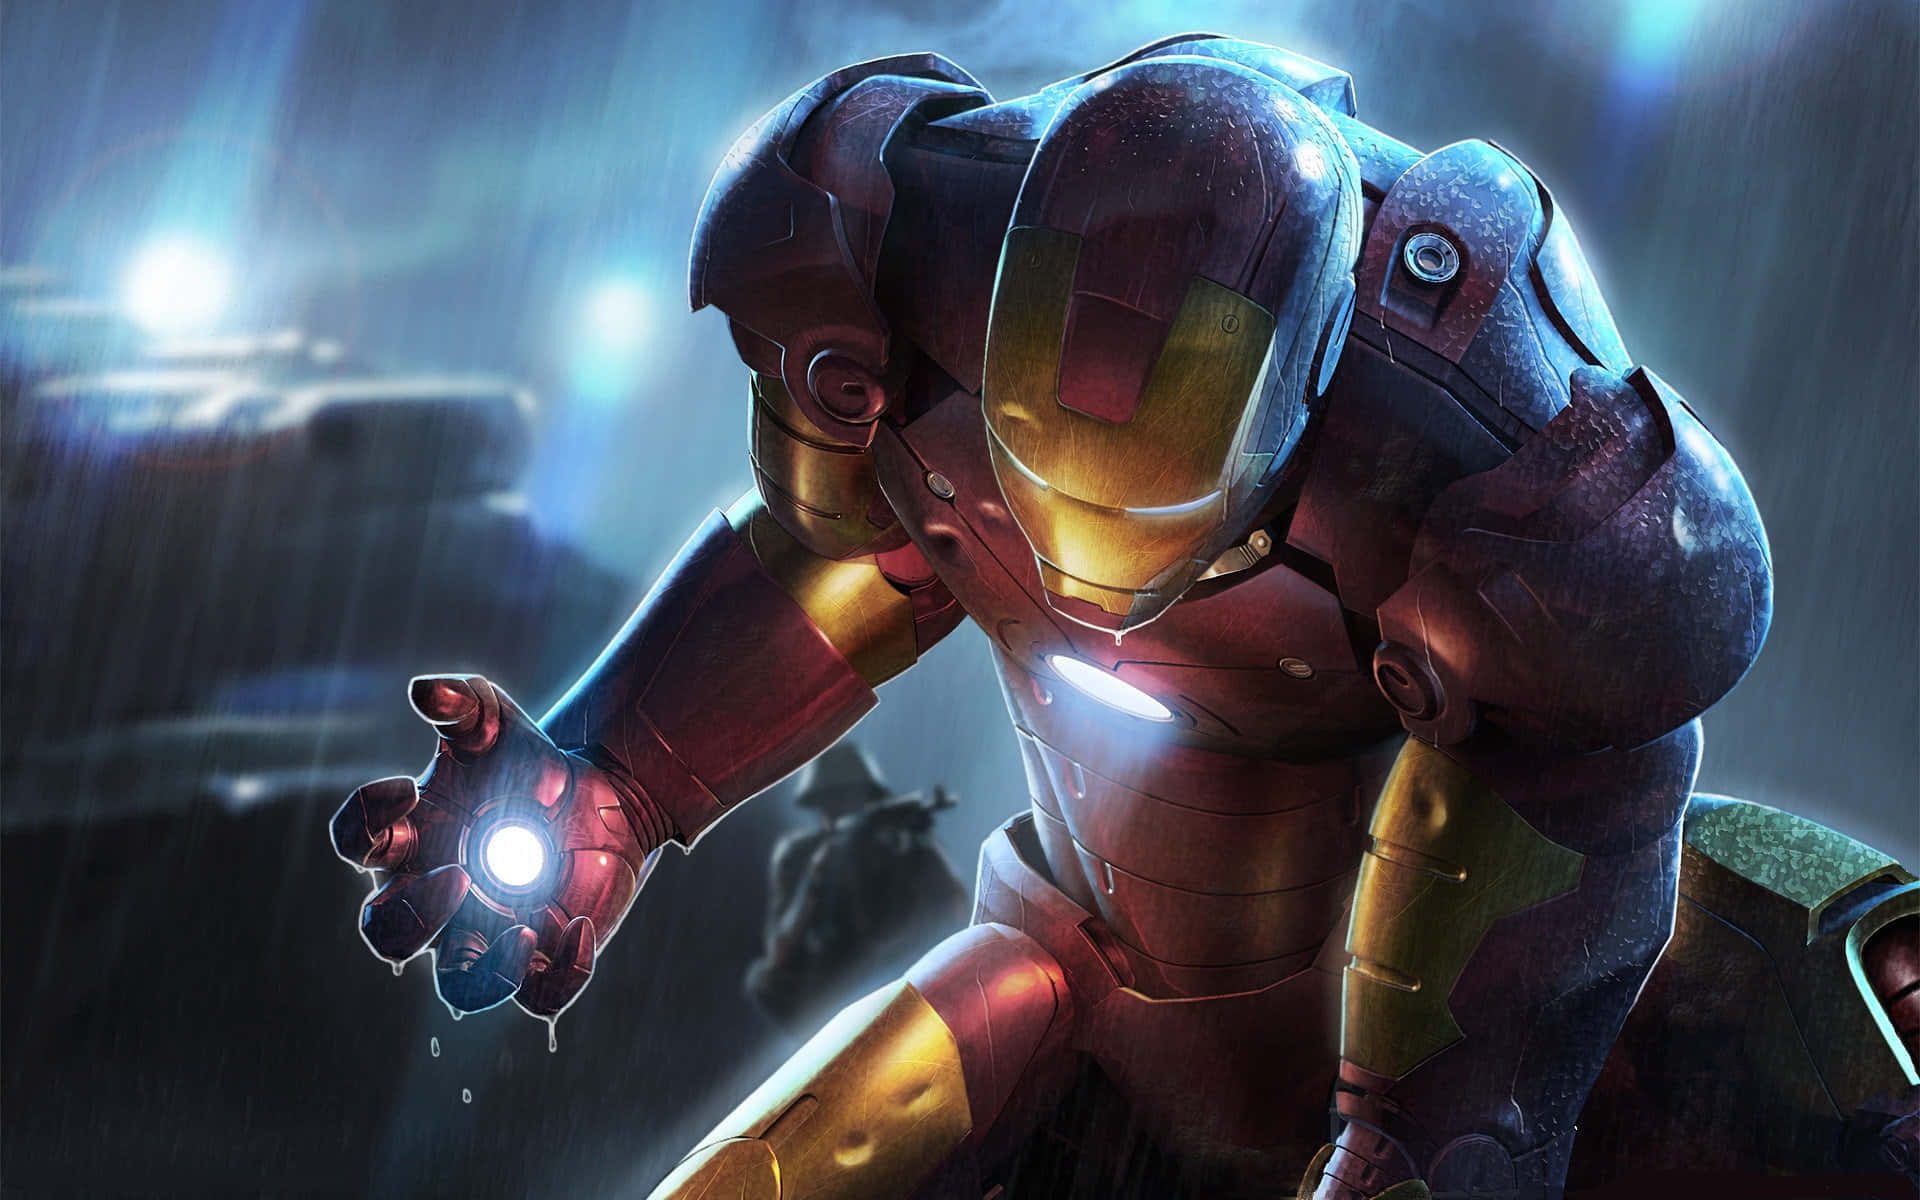 "Be the hero you were born to be" – Iron Man